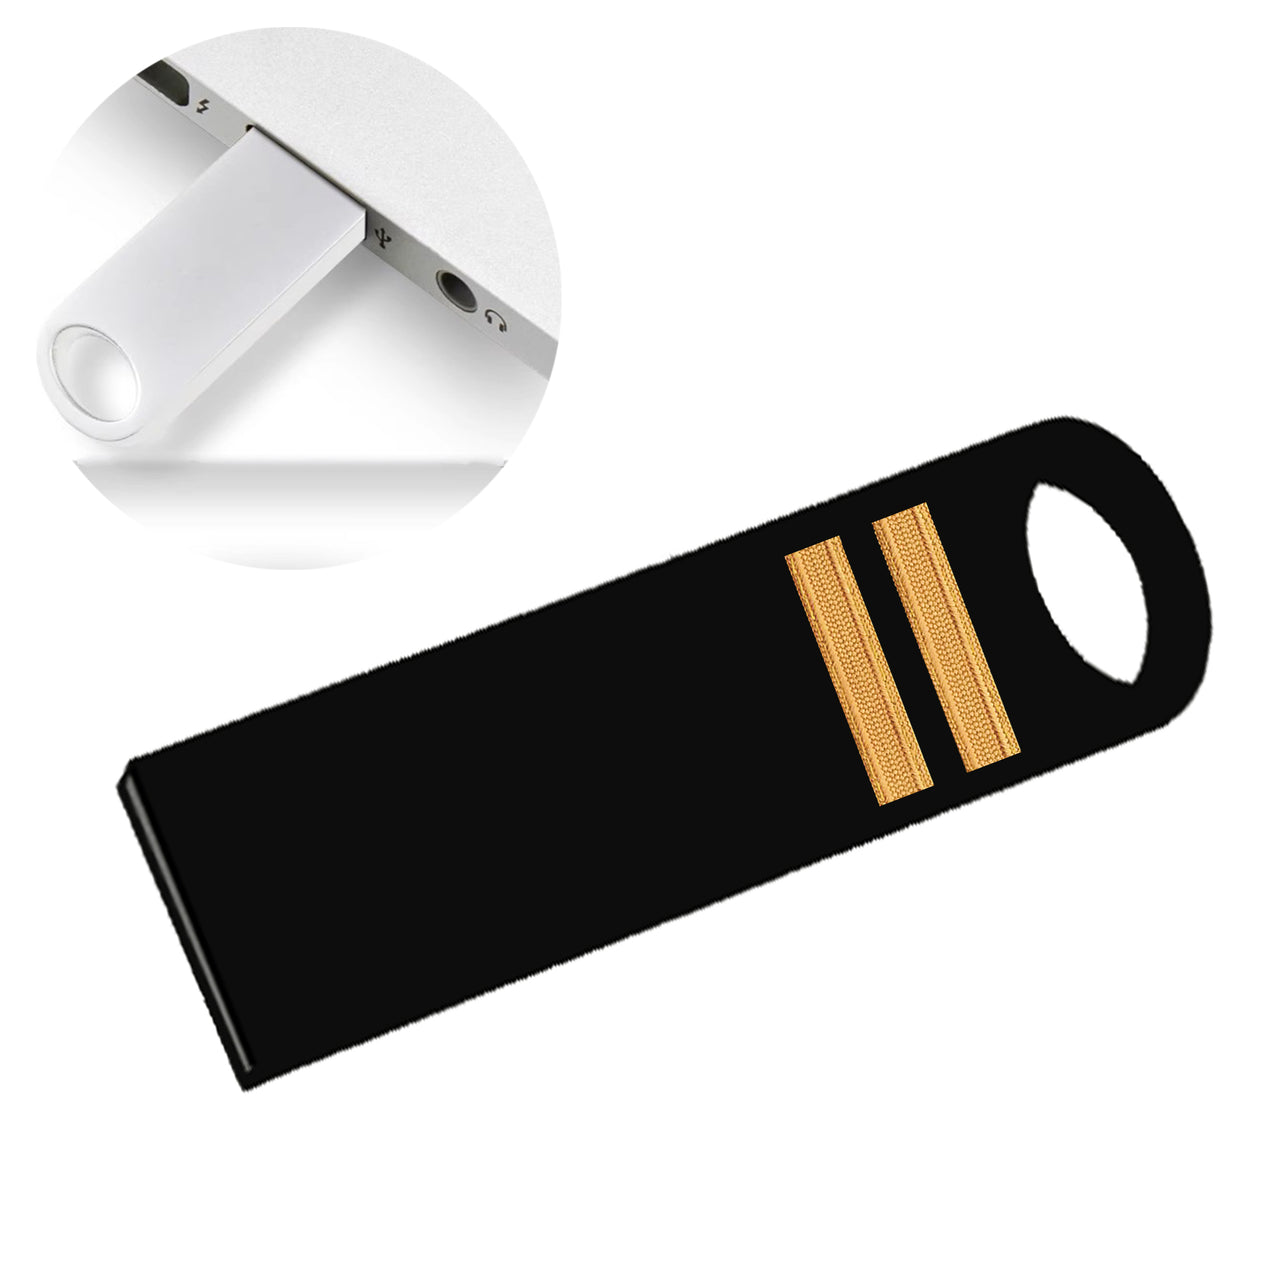 Special Golden Epaulettes (4,3,2 Lines) Designed Waterproof USB Devices